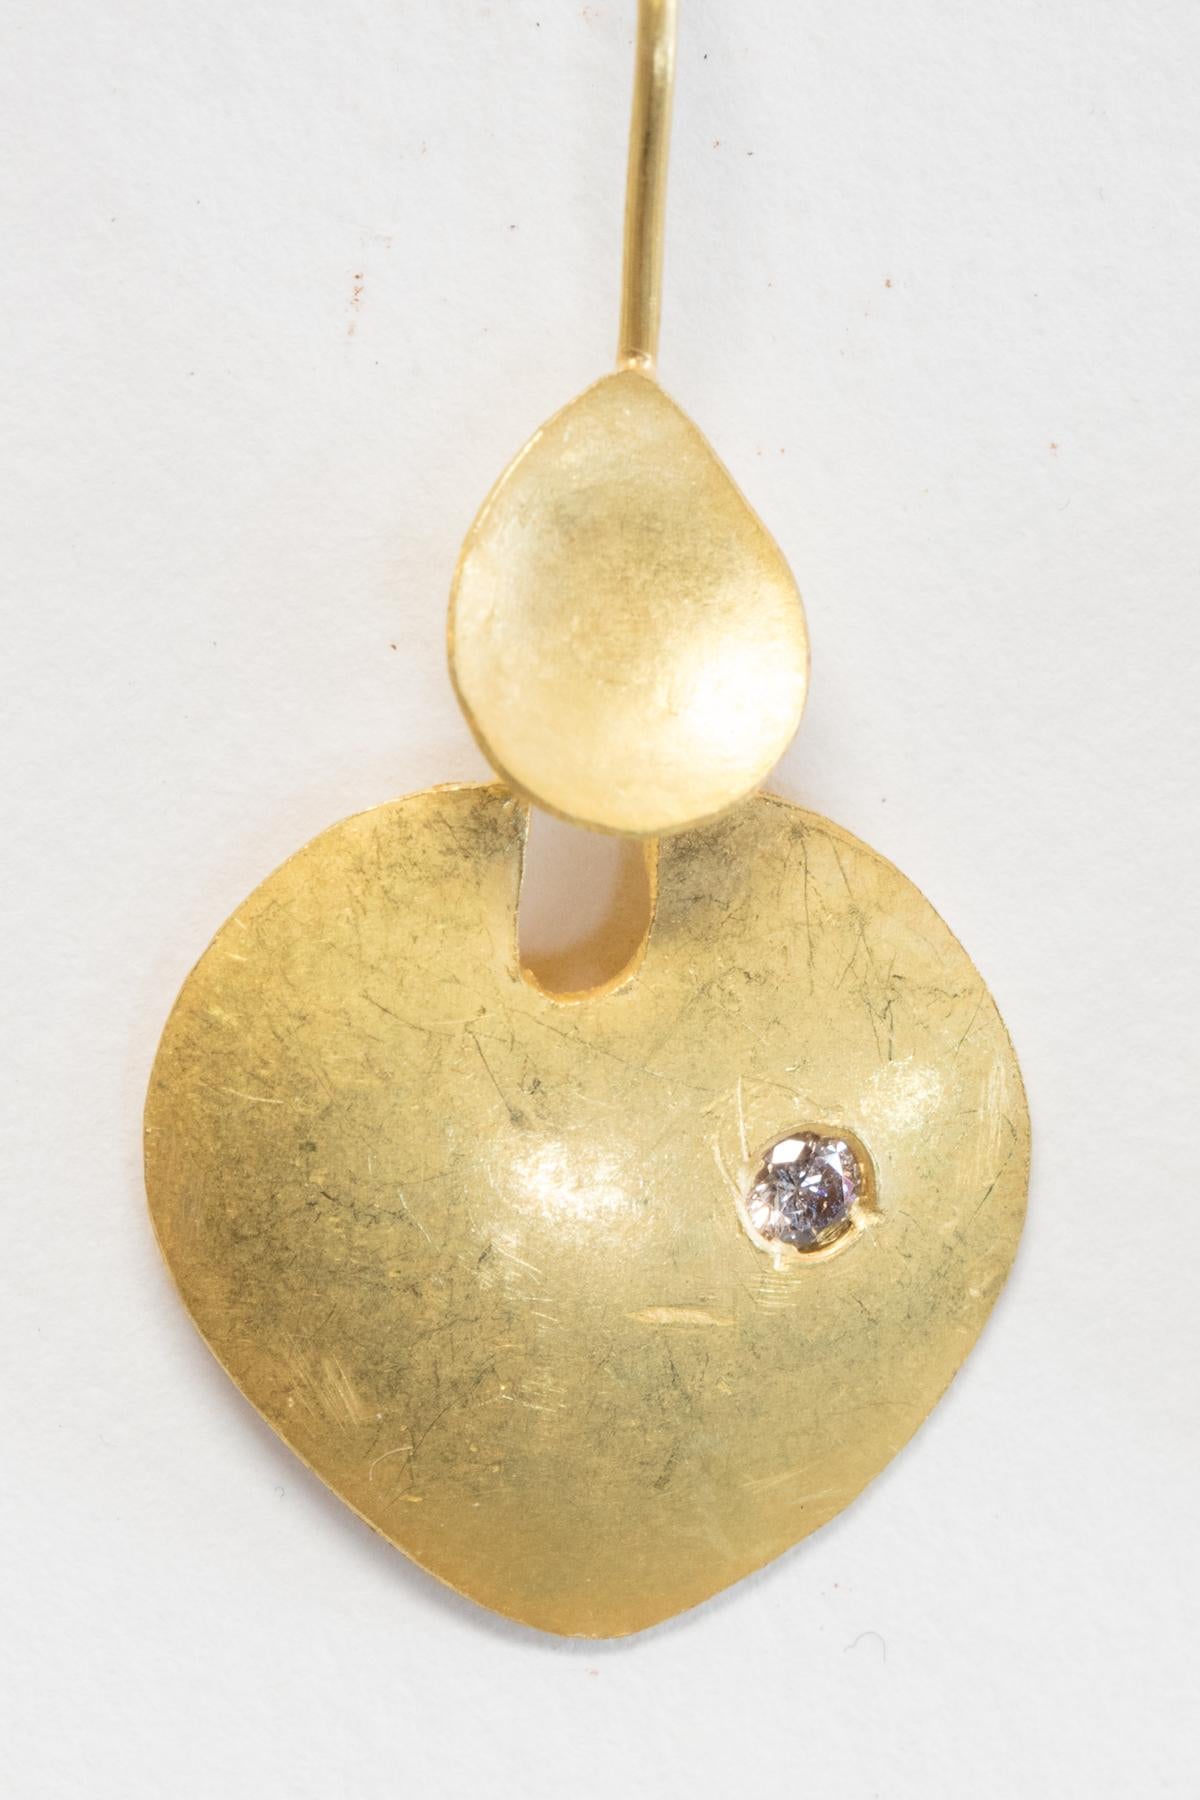 A pair of 22K gold drop earrings in a matte finish with an off-set, faceted diamond inserted into the gold.   On french wire, for pierced ears.